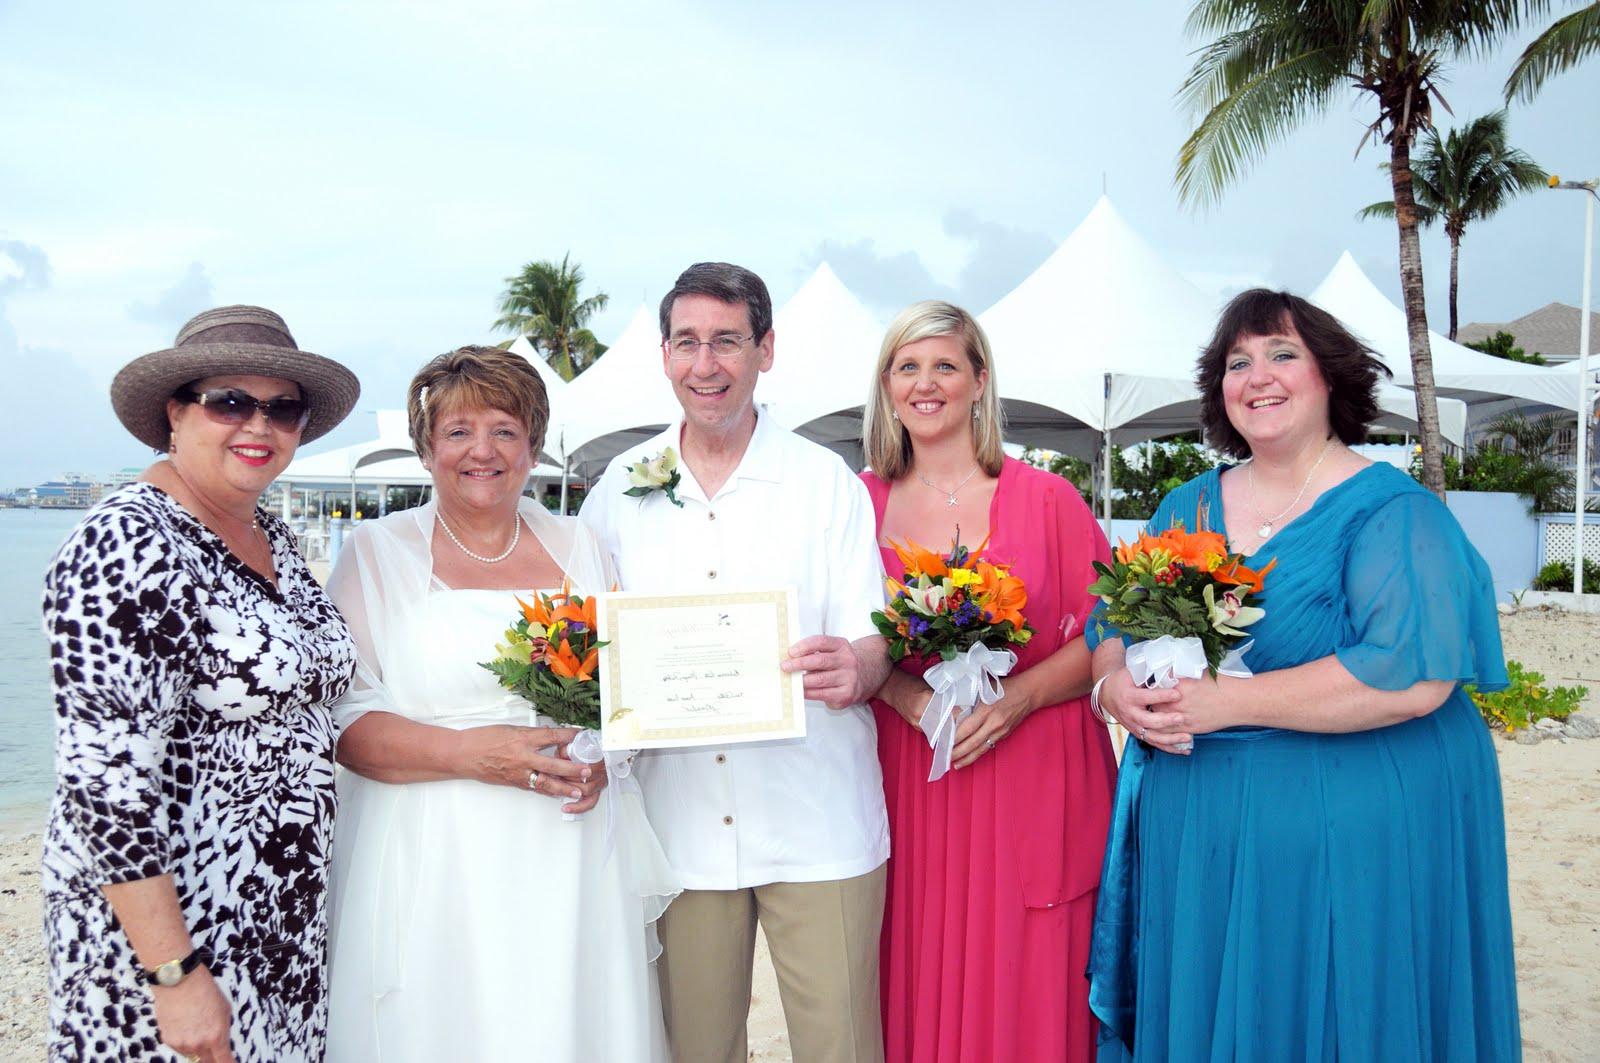 Posing with their Vow Renewal Certificate and the whole group.